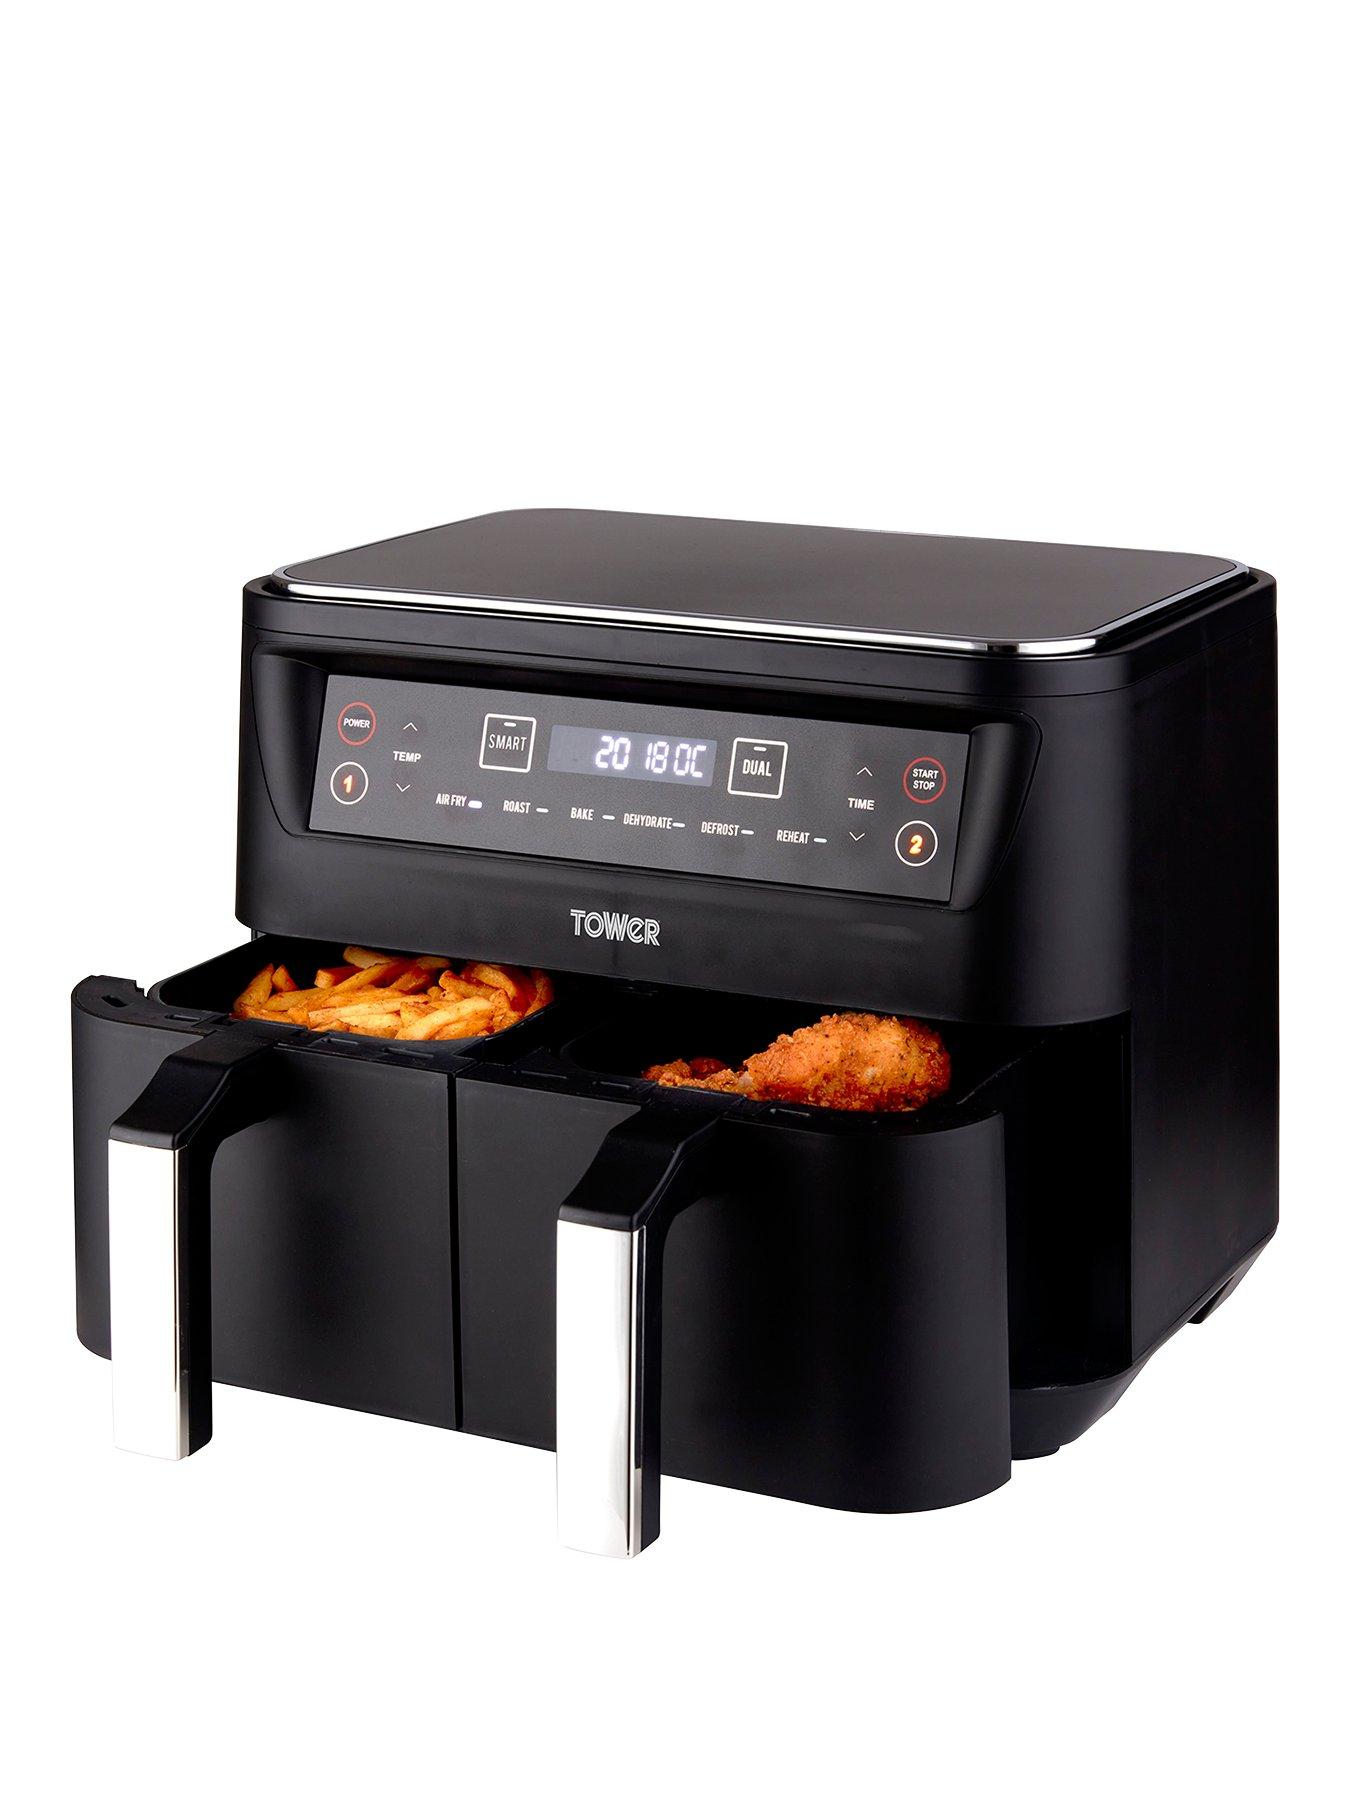 Argos Product Support for Tower T17088 9L Dual Basket Vortx Air Fryer -  Black (409/6137)